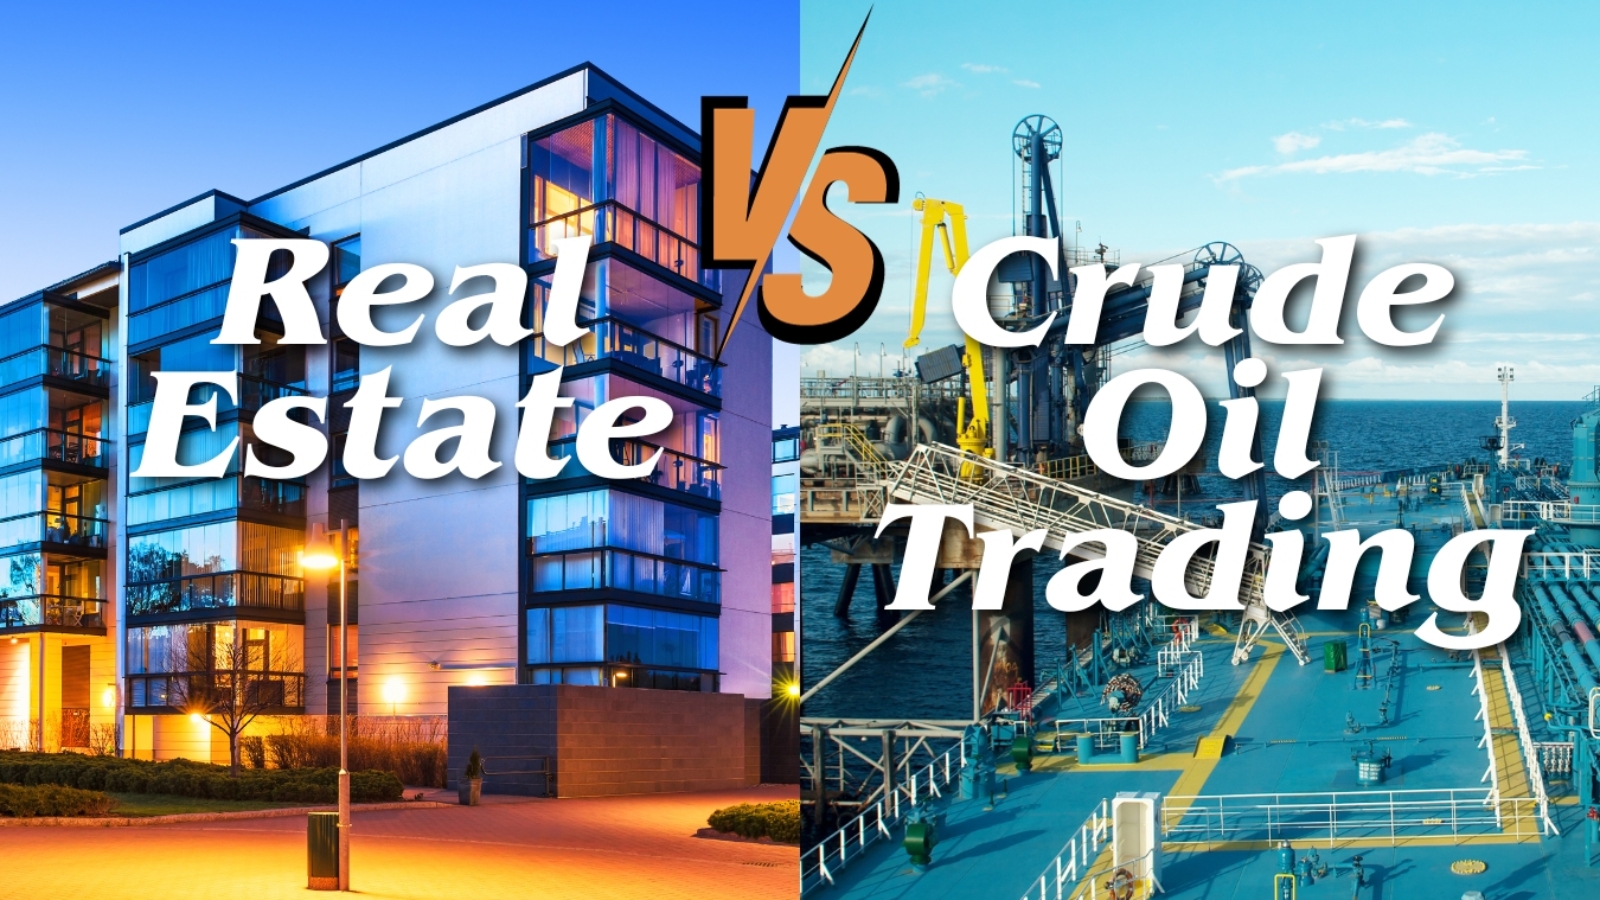 Real Estate or Crude Oil Trading